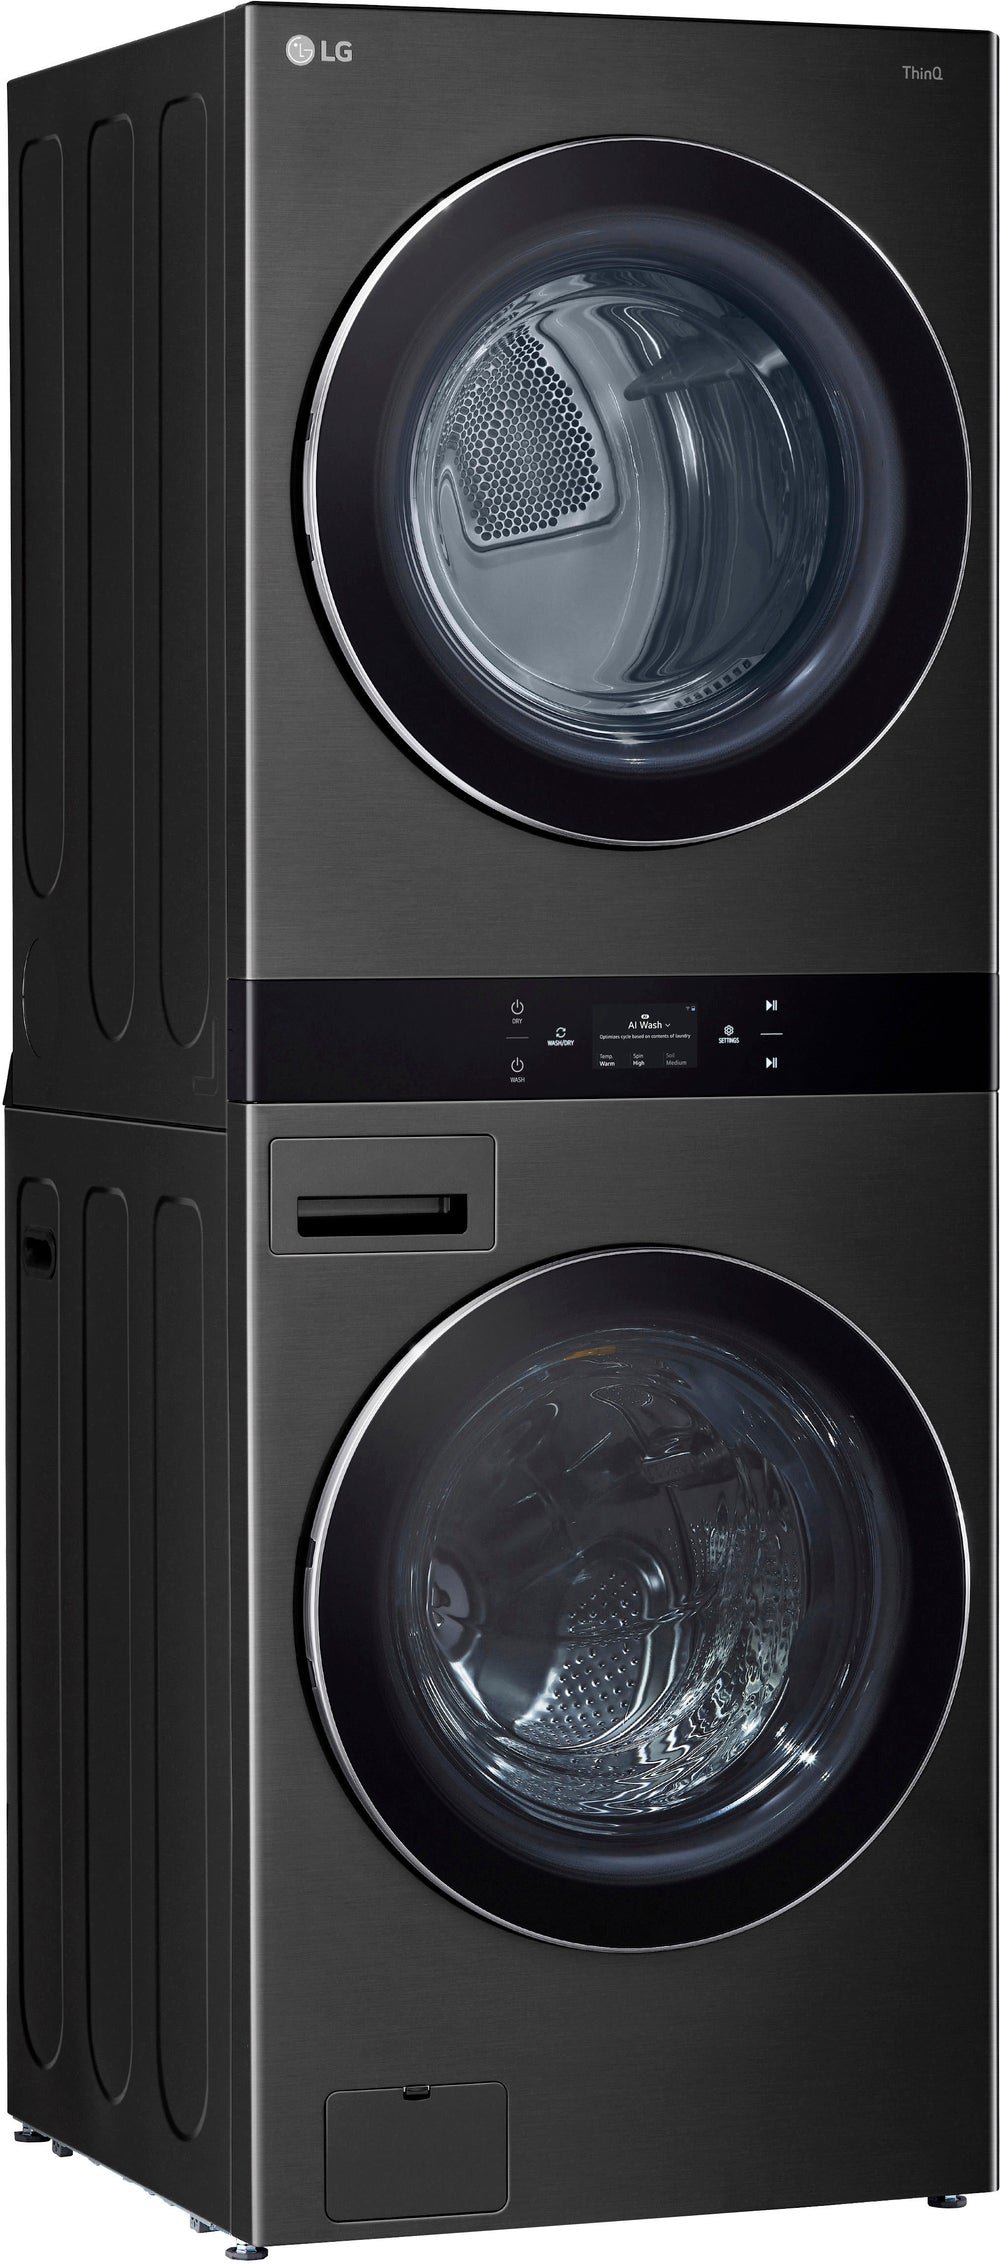 LG - 5.0 Cu. Ft. HE Smart Front Load Washer and 7.4 Cu. Ft. Gas Dryer WashTower with Steam and Center Control - Black Steel_1